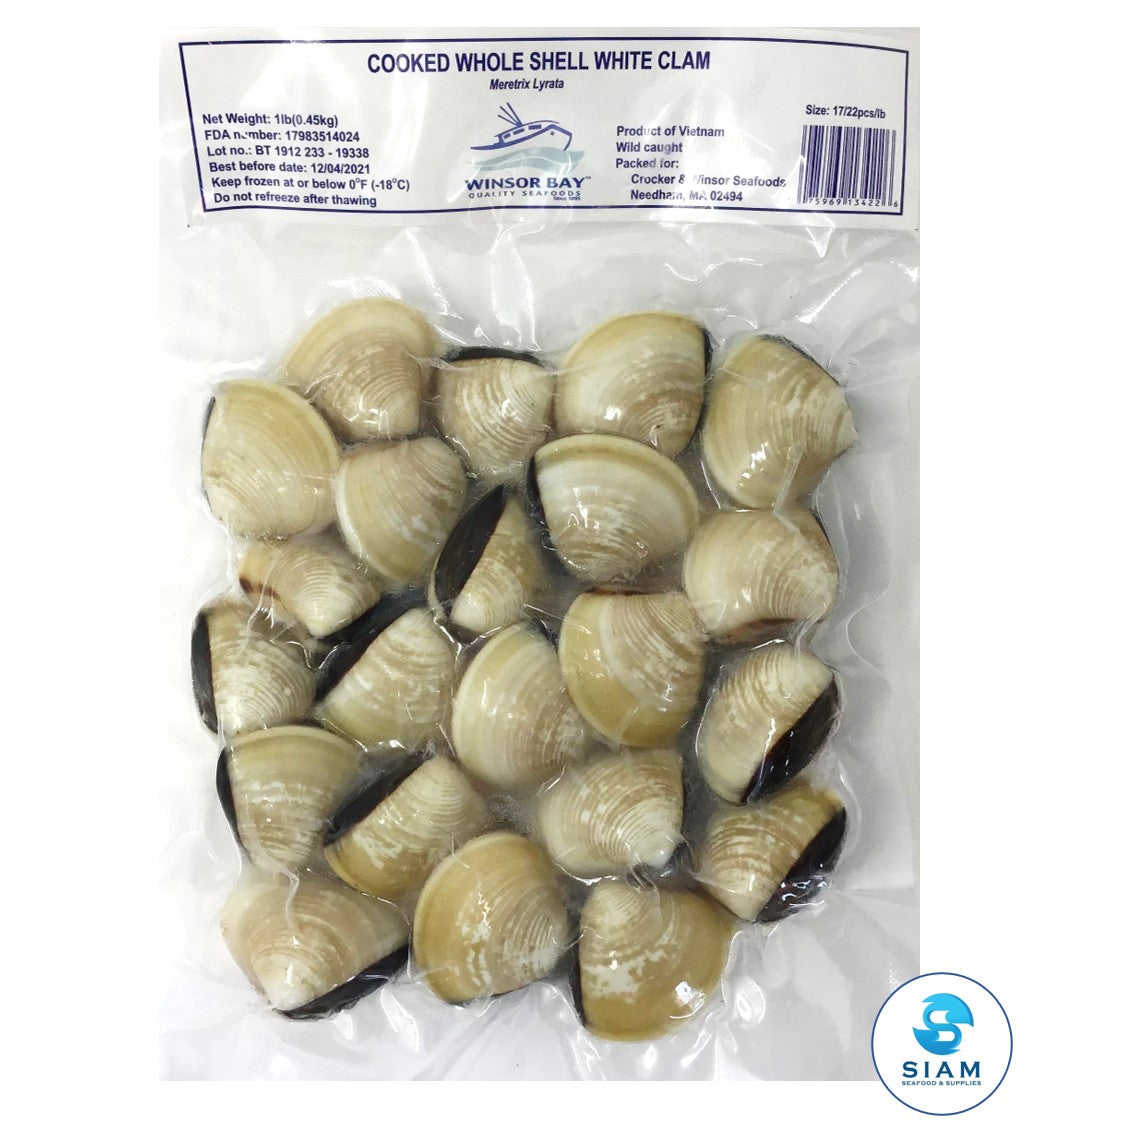 Cooked Whole Shell White Clam, Wild Caught, Frozen (1 lb bag-$2.50/lb) Windsor Bay